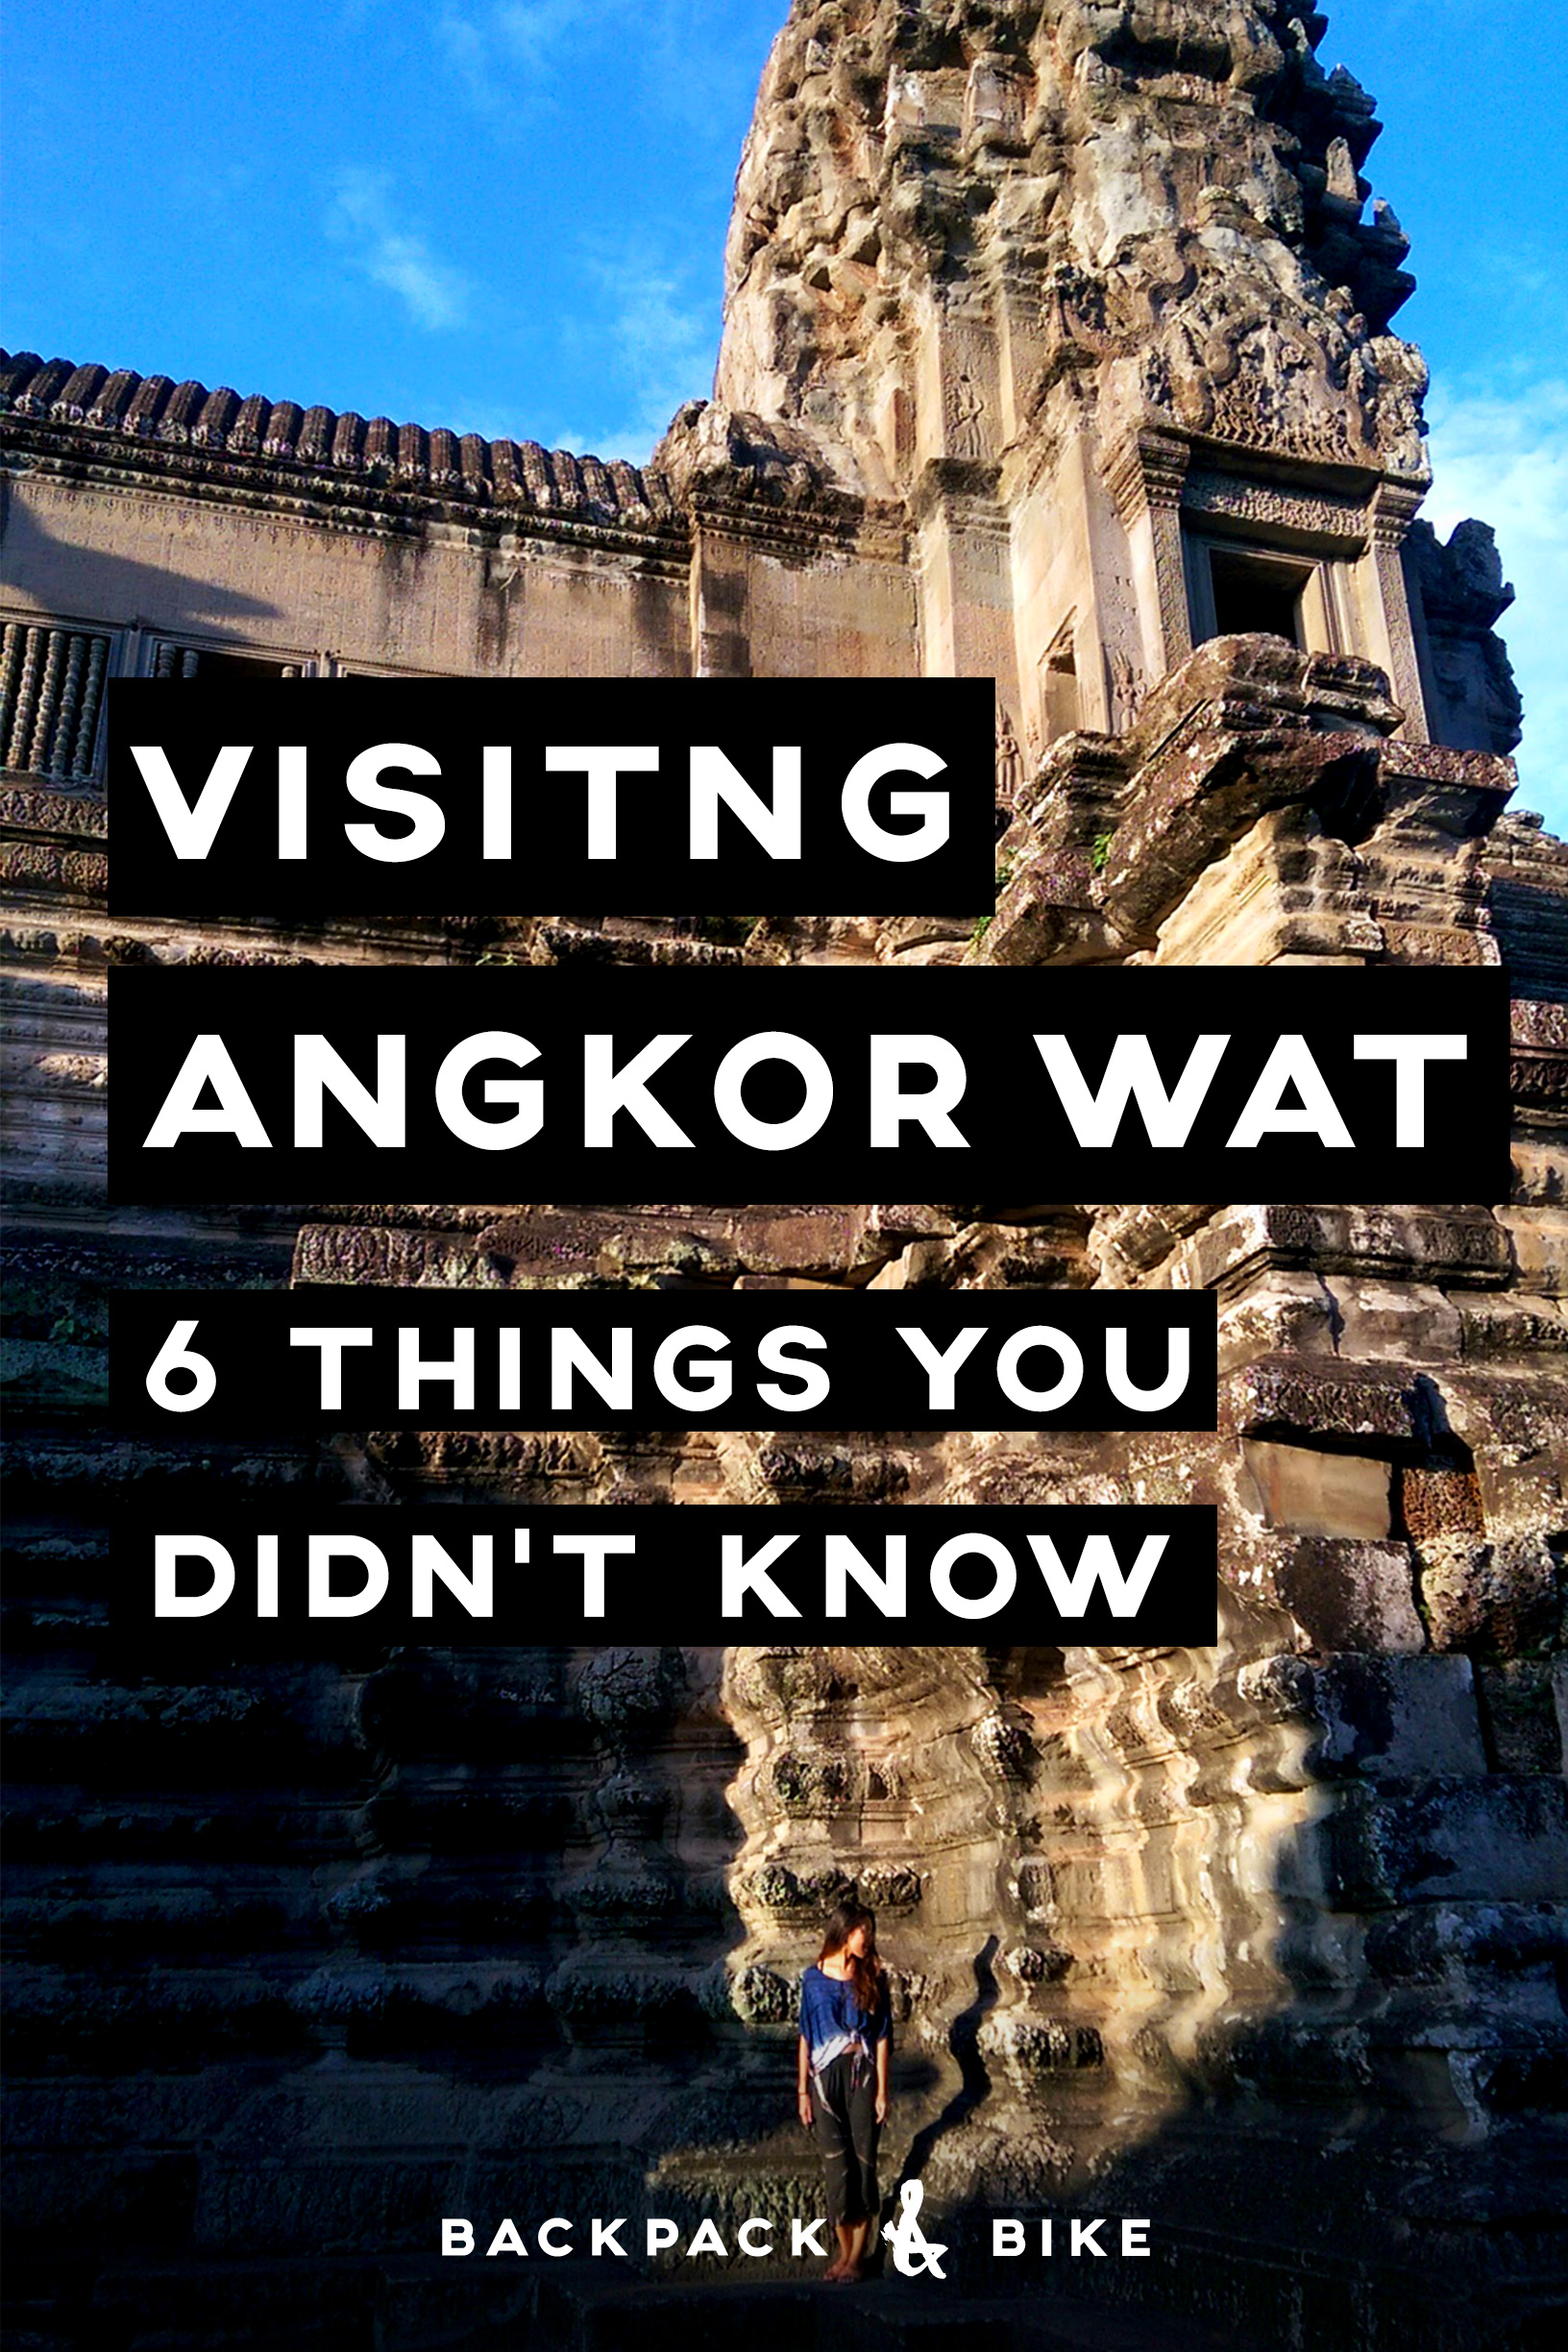 Visiting Angkor Wat | 6 Things You Didn't Know | So you're in (or planning a visit to) Southeast Asia. Have you considered a trip to Siem Reap, Cambodia to visit Angkor Archeological Park (Angkor Wat)?